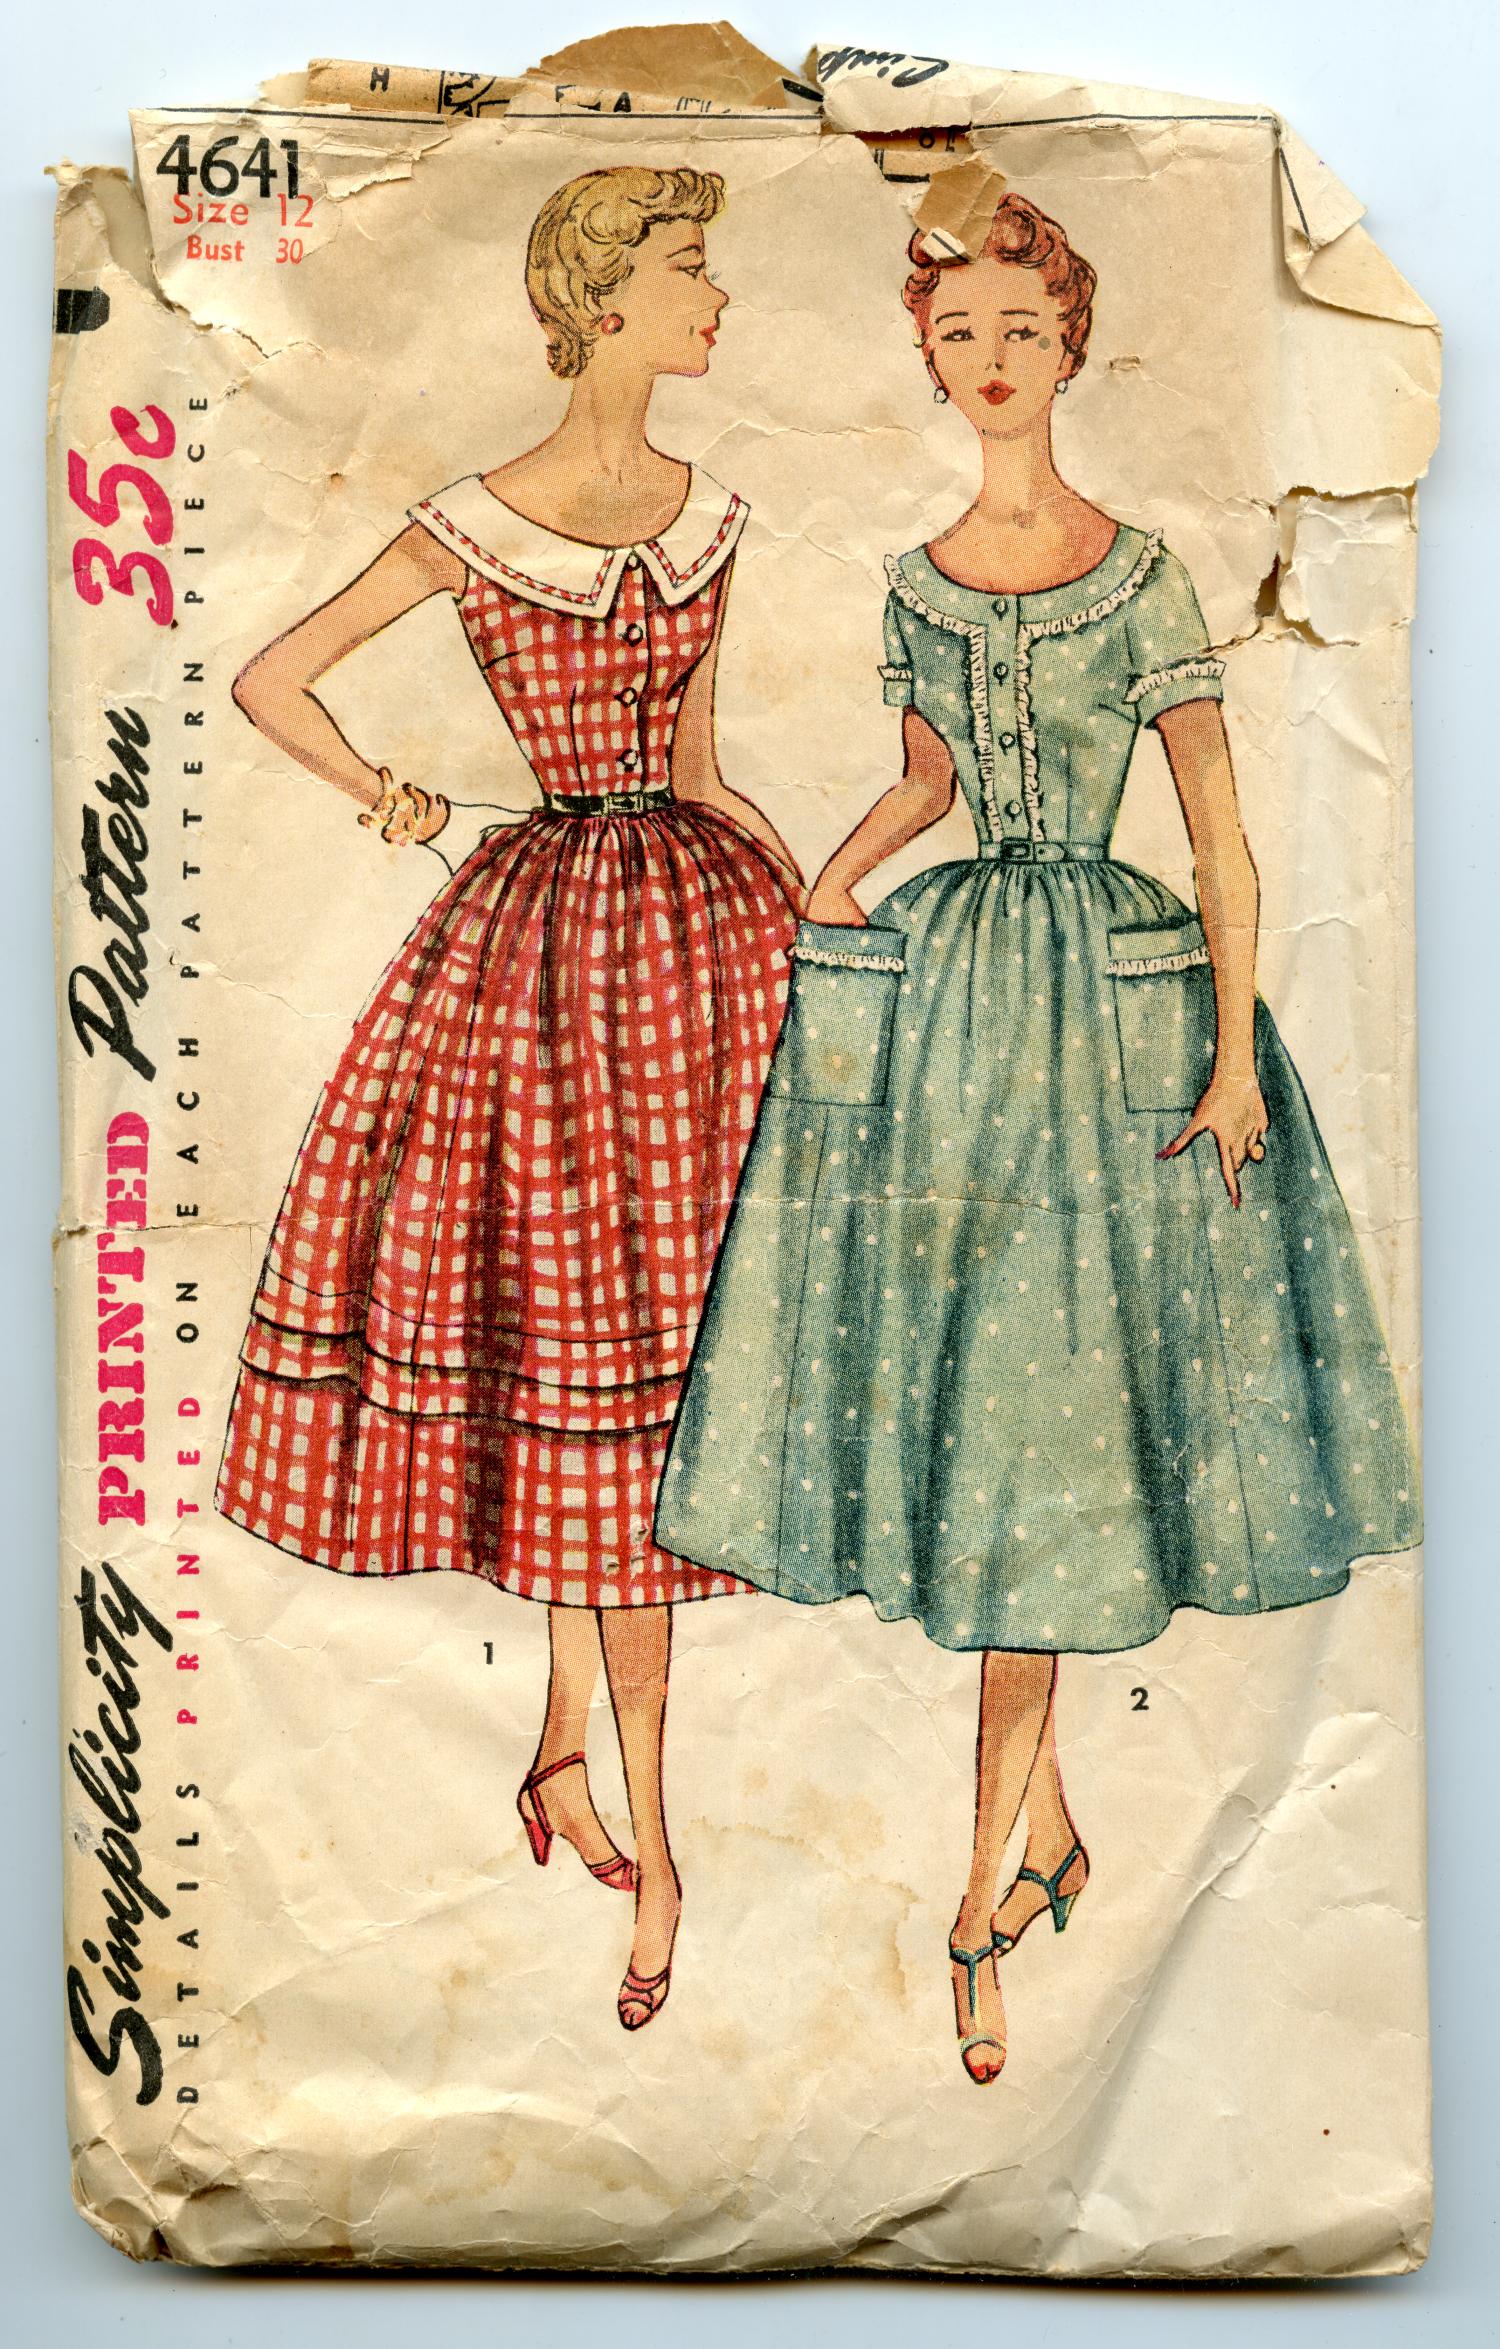 Envelope for Simplicity Pattern #4641
                                                
                                                    [Sequence #]: 1 of 2
                                                